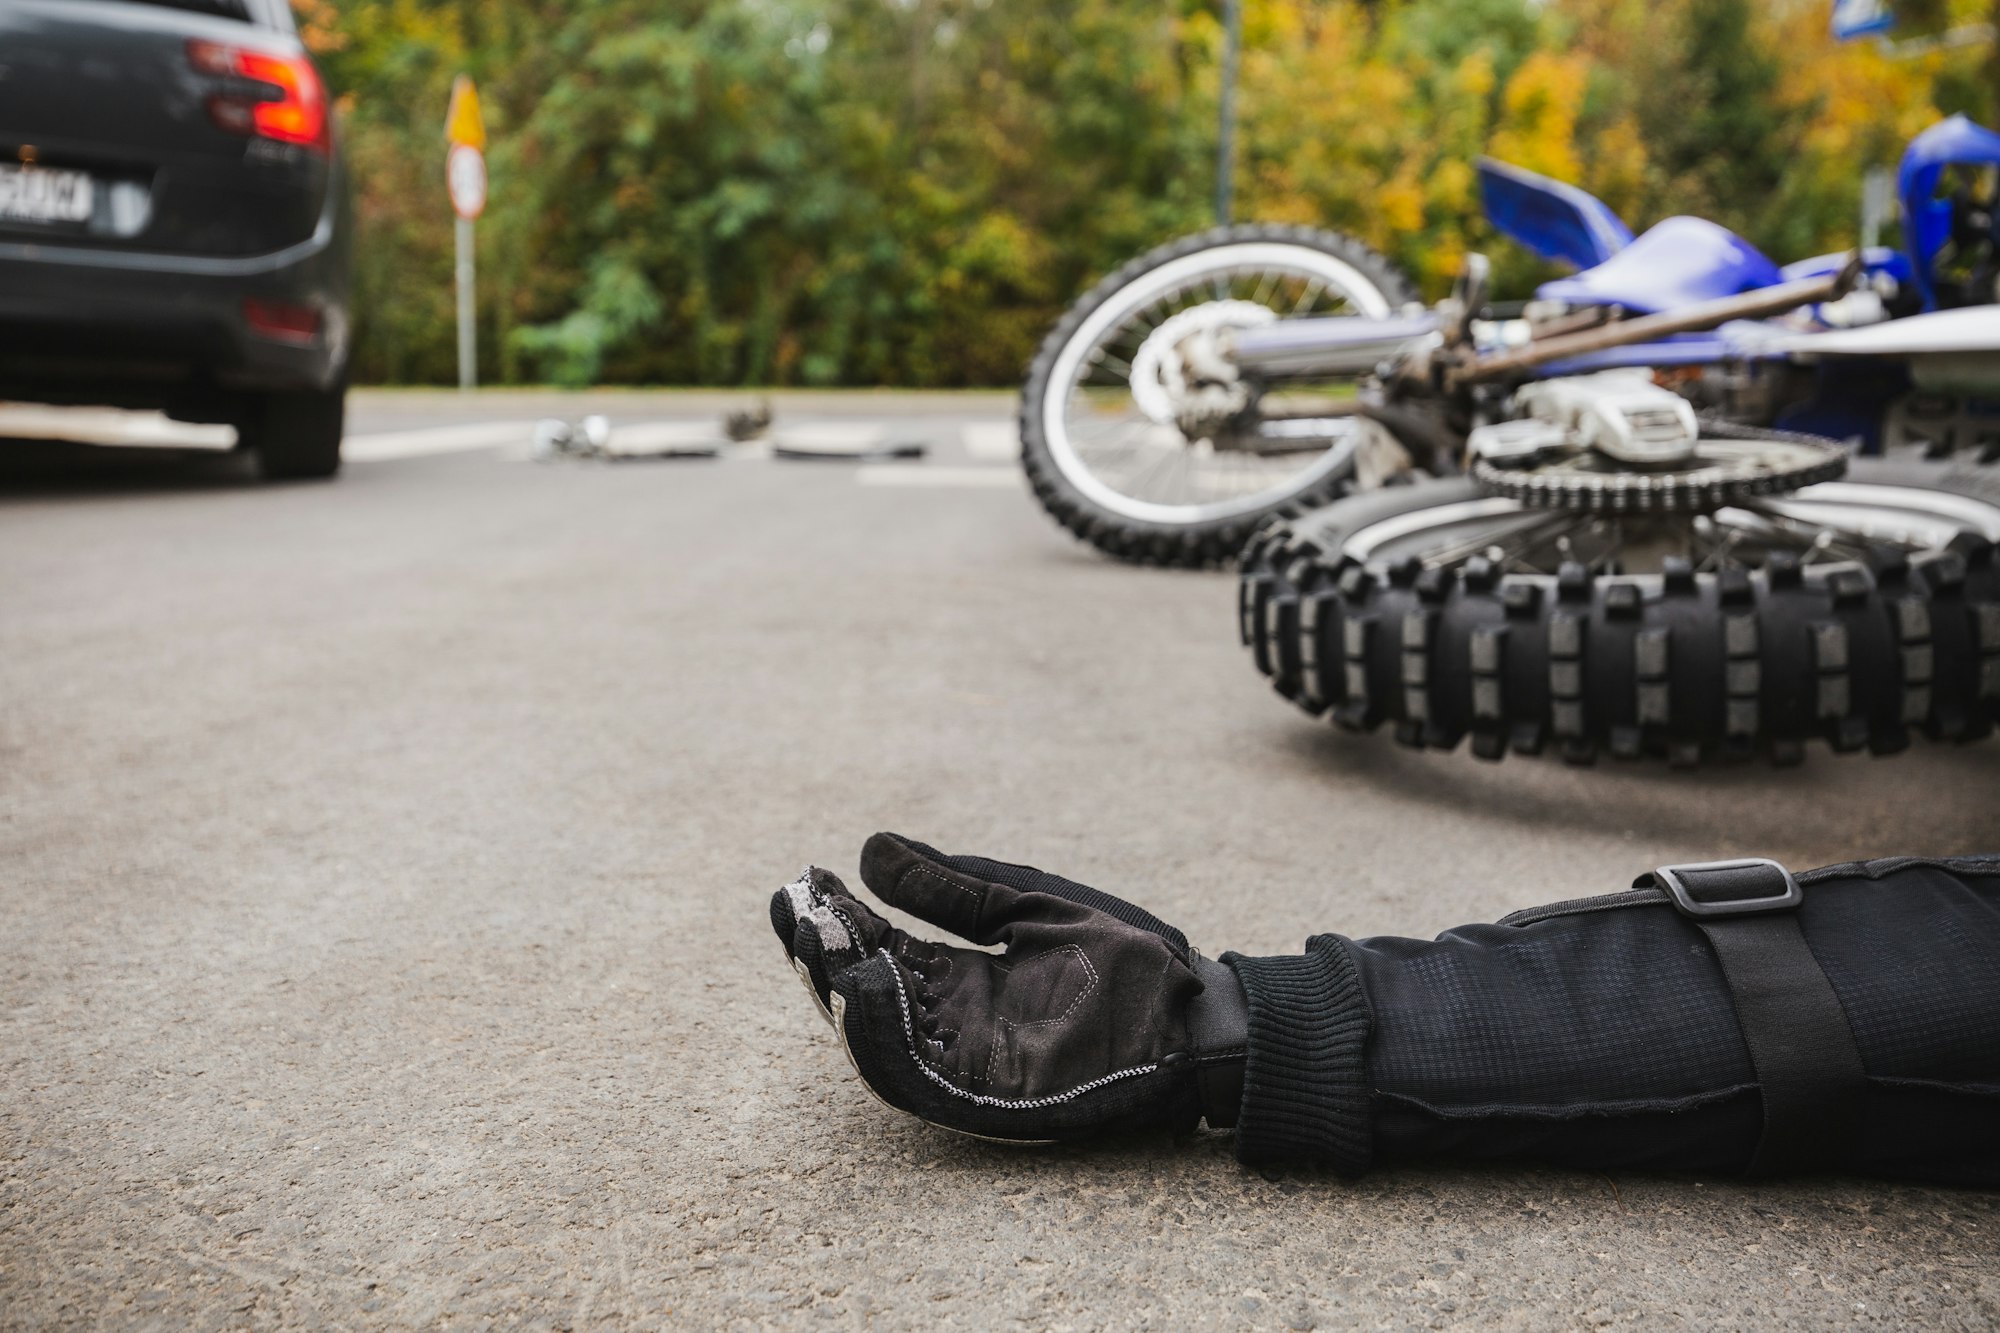 How Much is My Motorcycle Accident Injury Claim Worth?